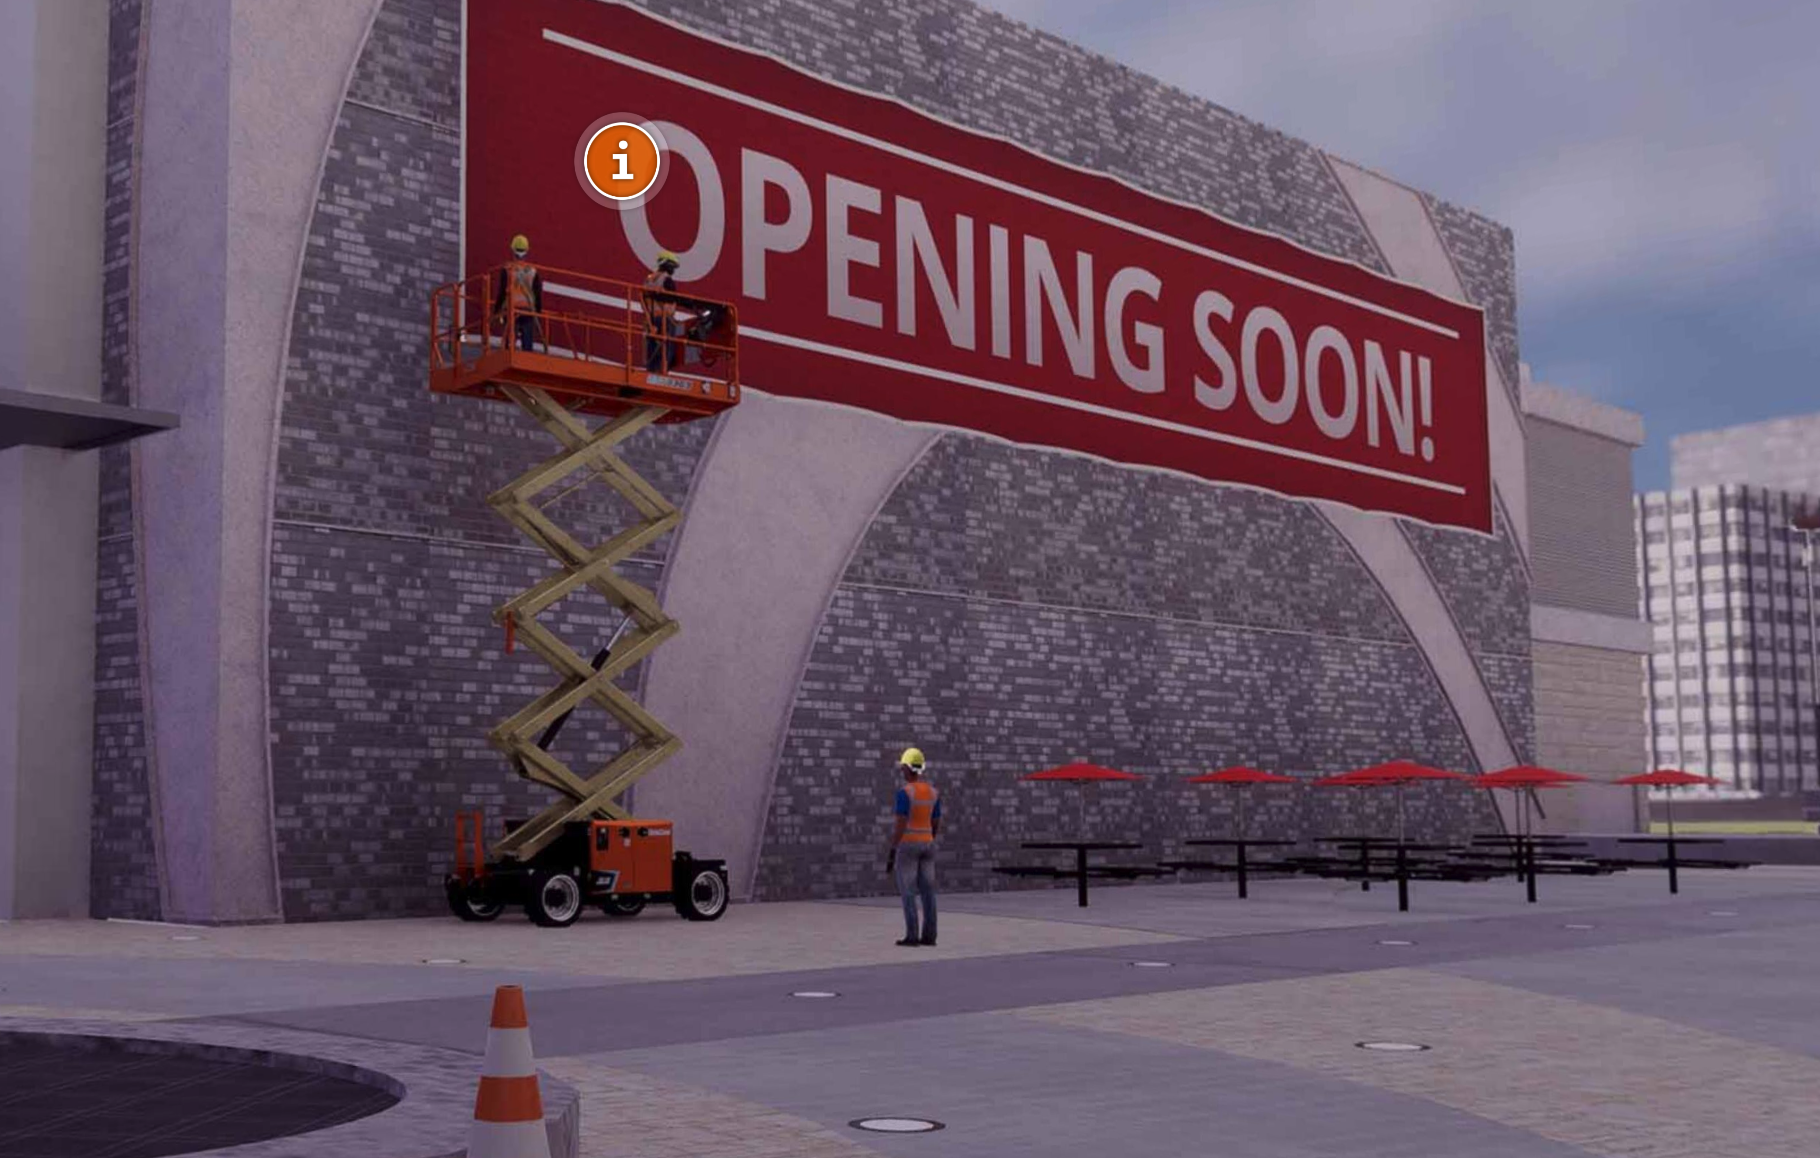 JLG Access Your World Job Site 4_outdoor retail image